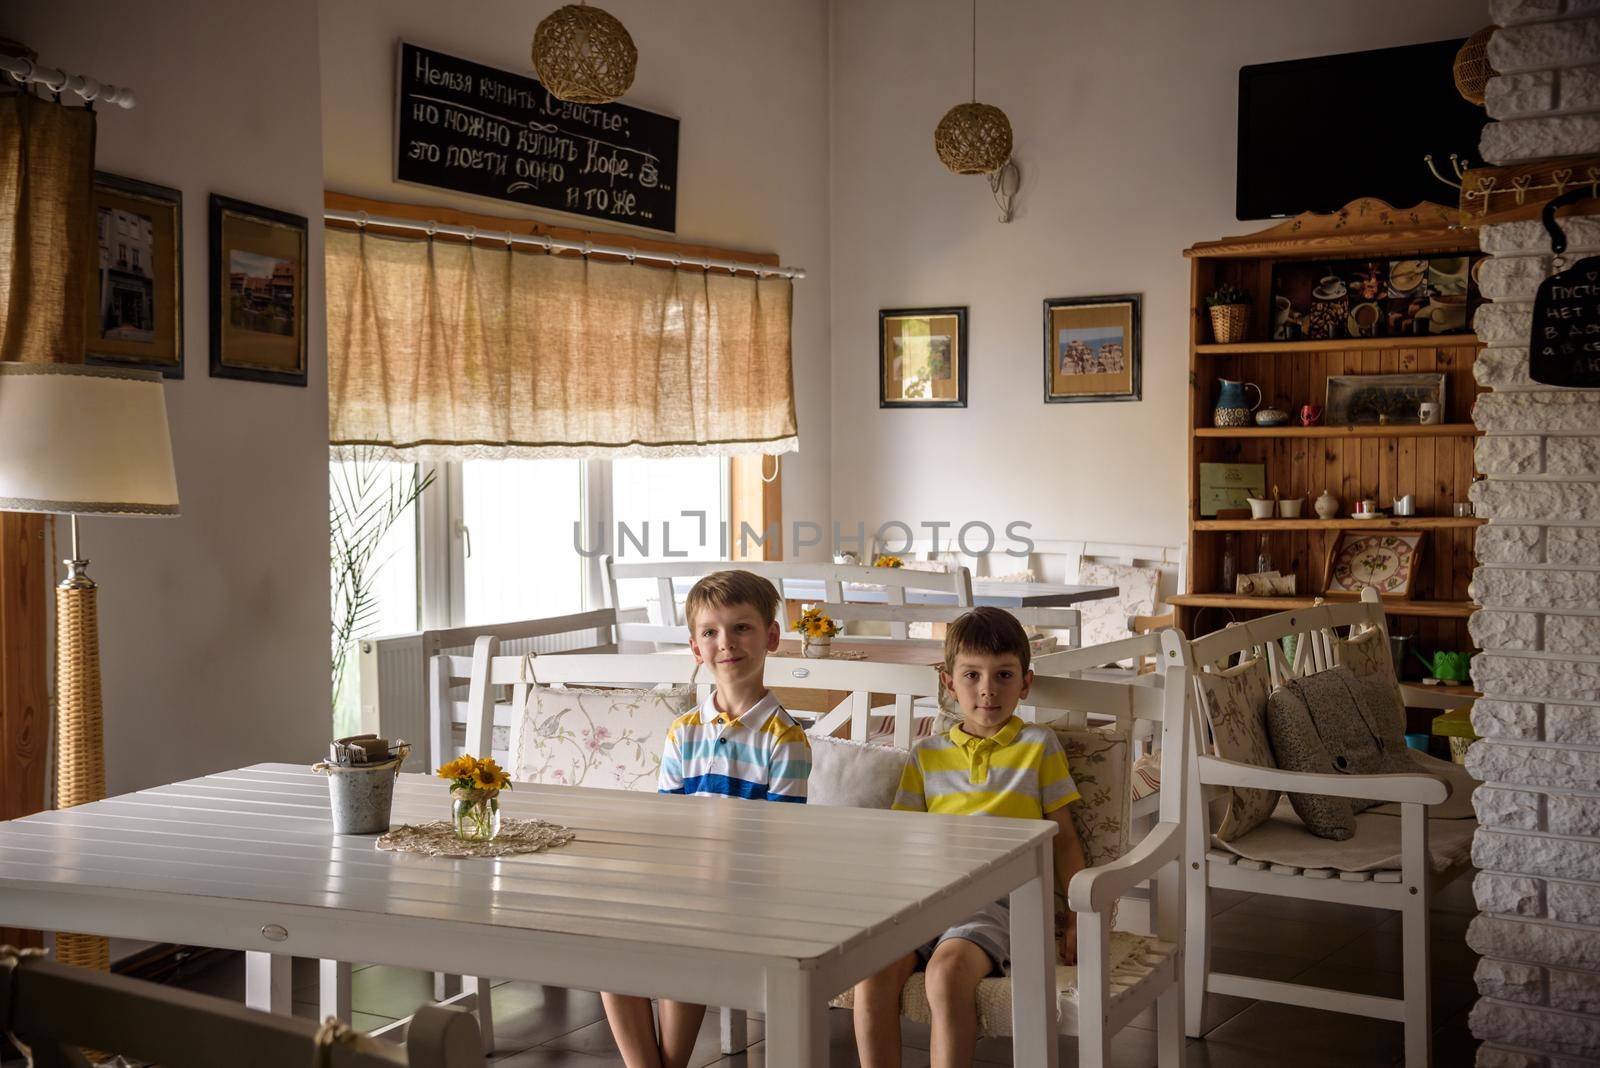 Modern cafe interior style, eco environmental with plant on wall, coffee shop. Two children sitting on bench near table waiting for tasty meal.